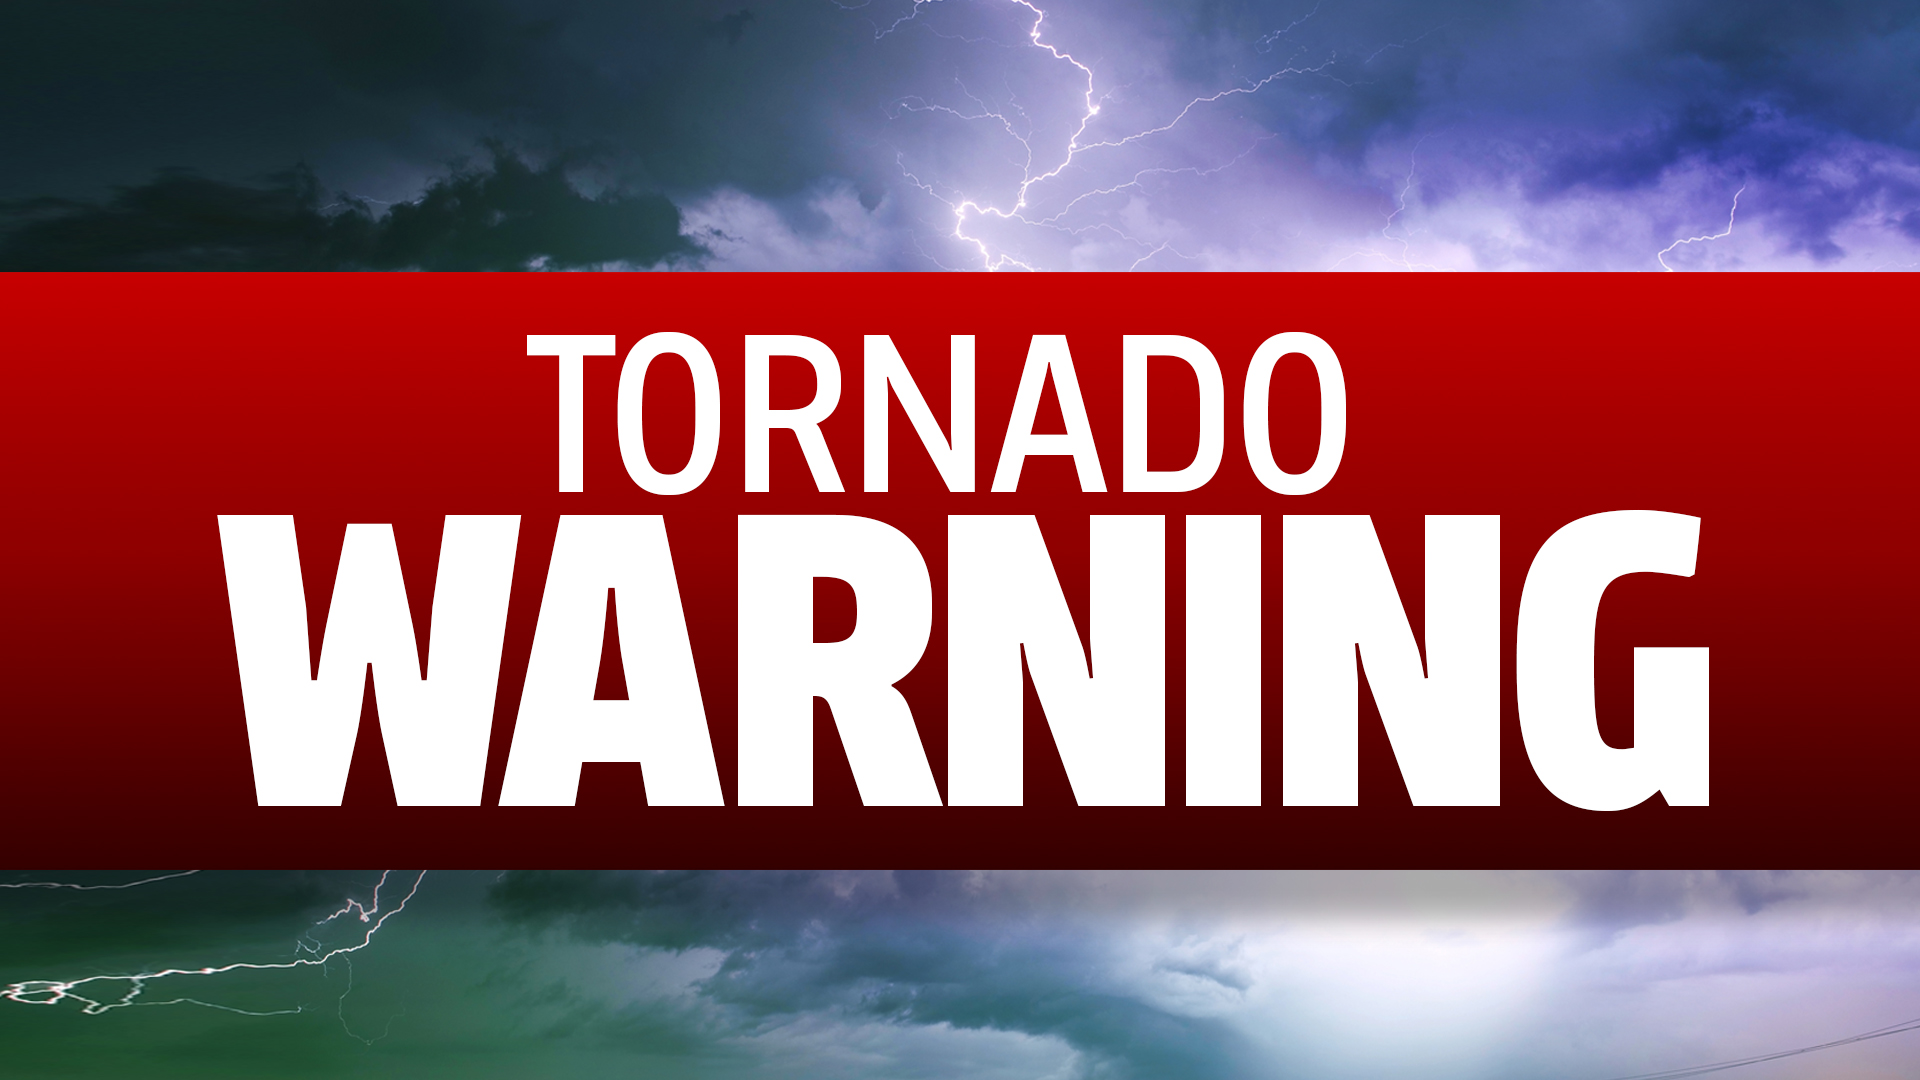 National Weather Service issues tornado warning for parts of Cuyahoga, Medi...